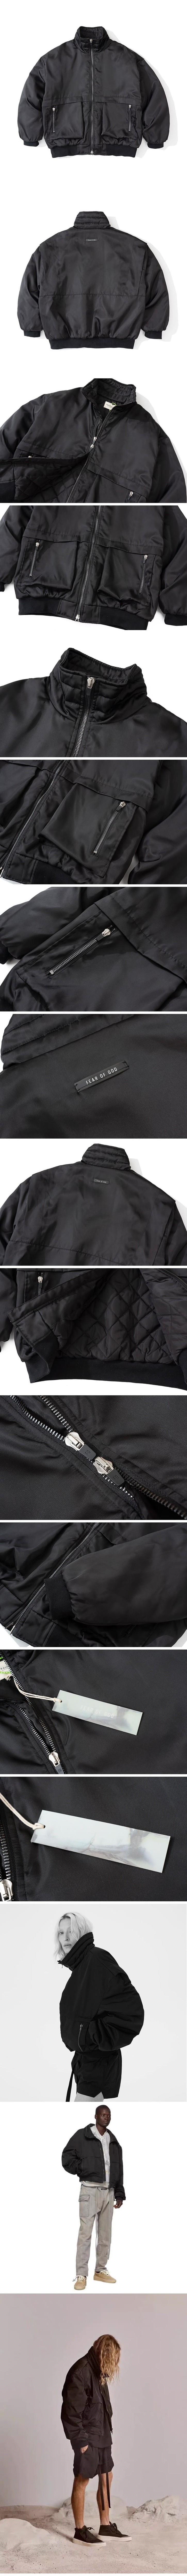 Fear Of God Cotton Padded Clothes Jacketフィアオブゴッド コットン パットジャケット